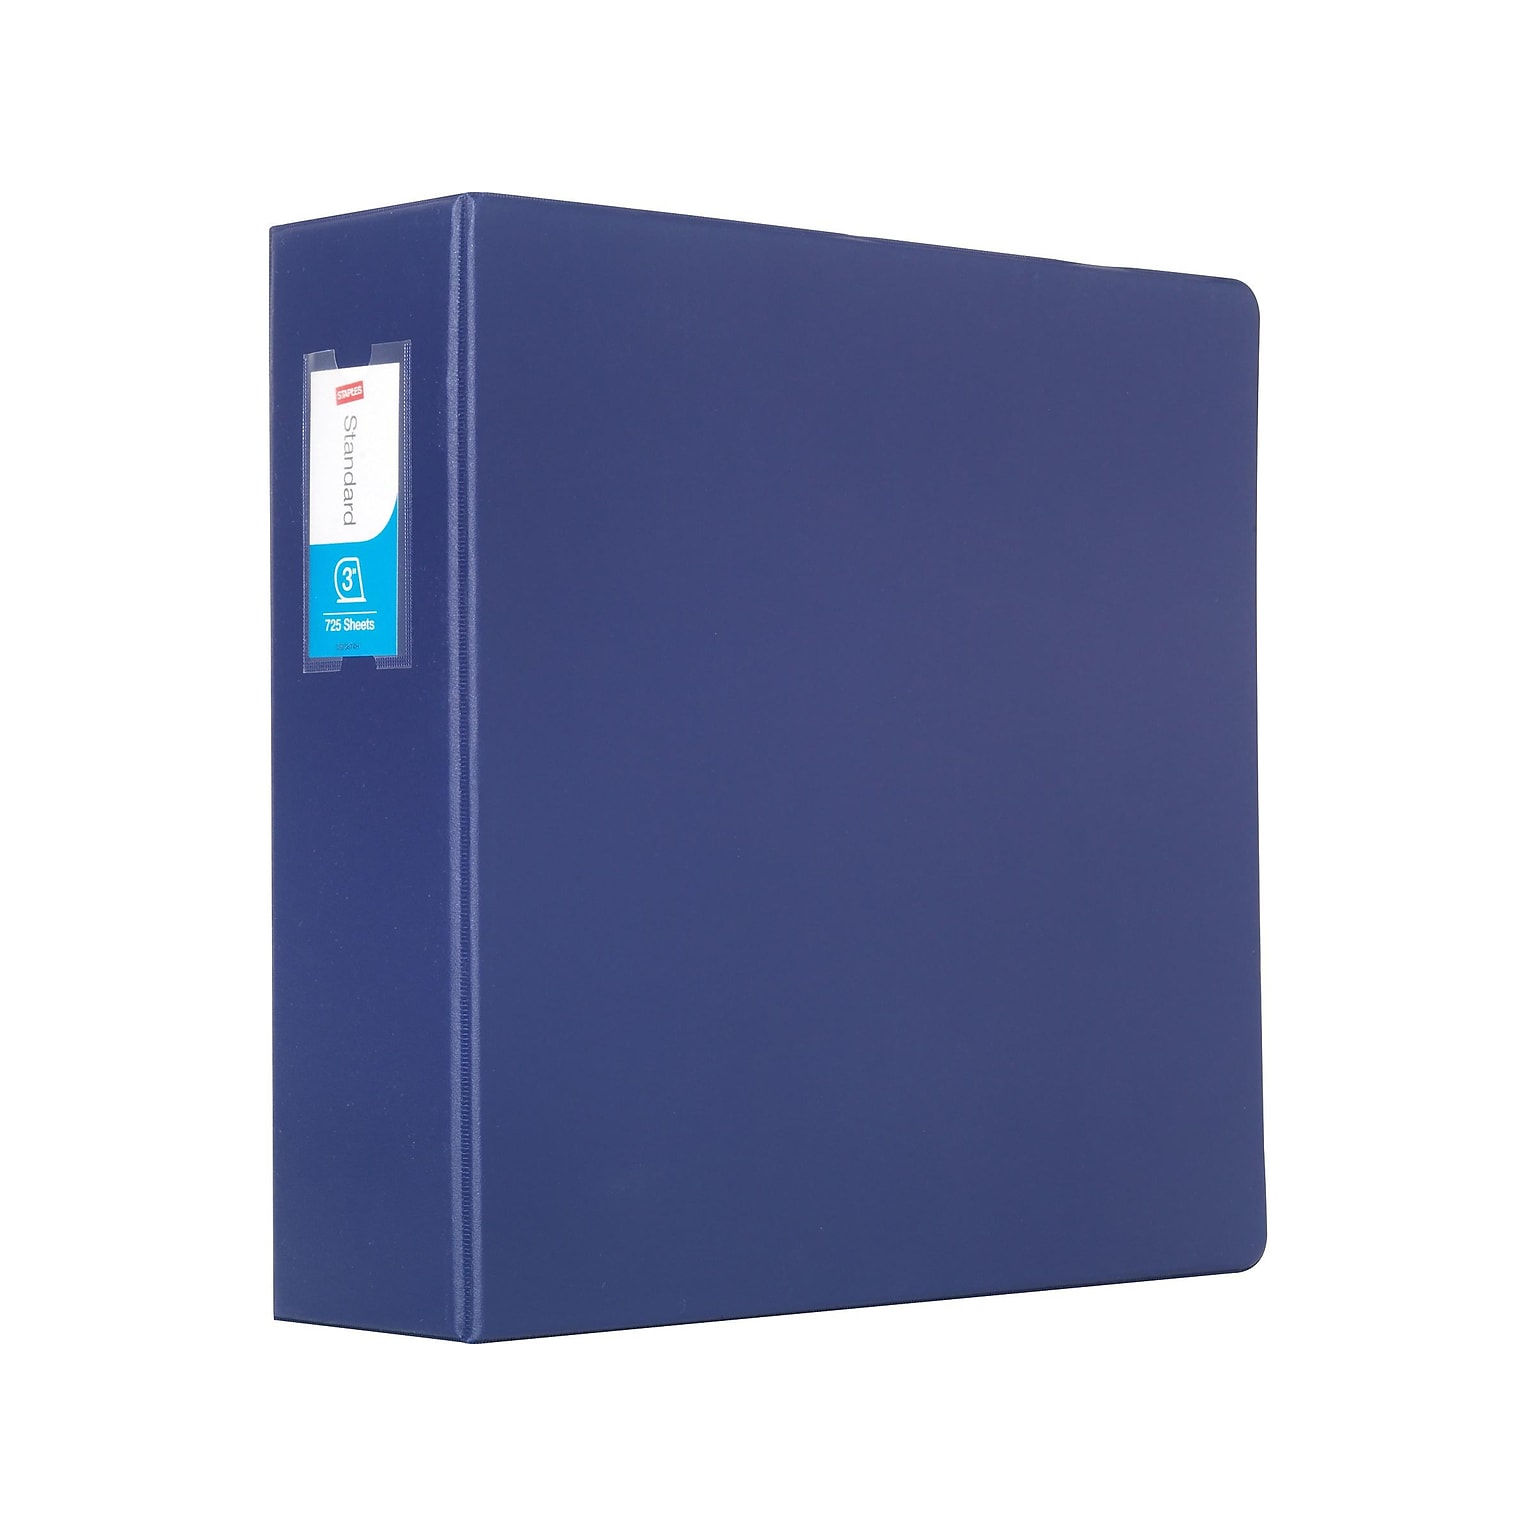 Staples Standard 3 3-Ring Non-View Binder With Label Holder, Navy Blue (26424-CC)